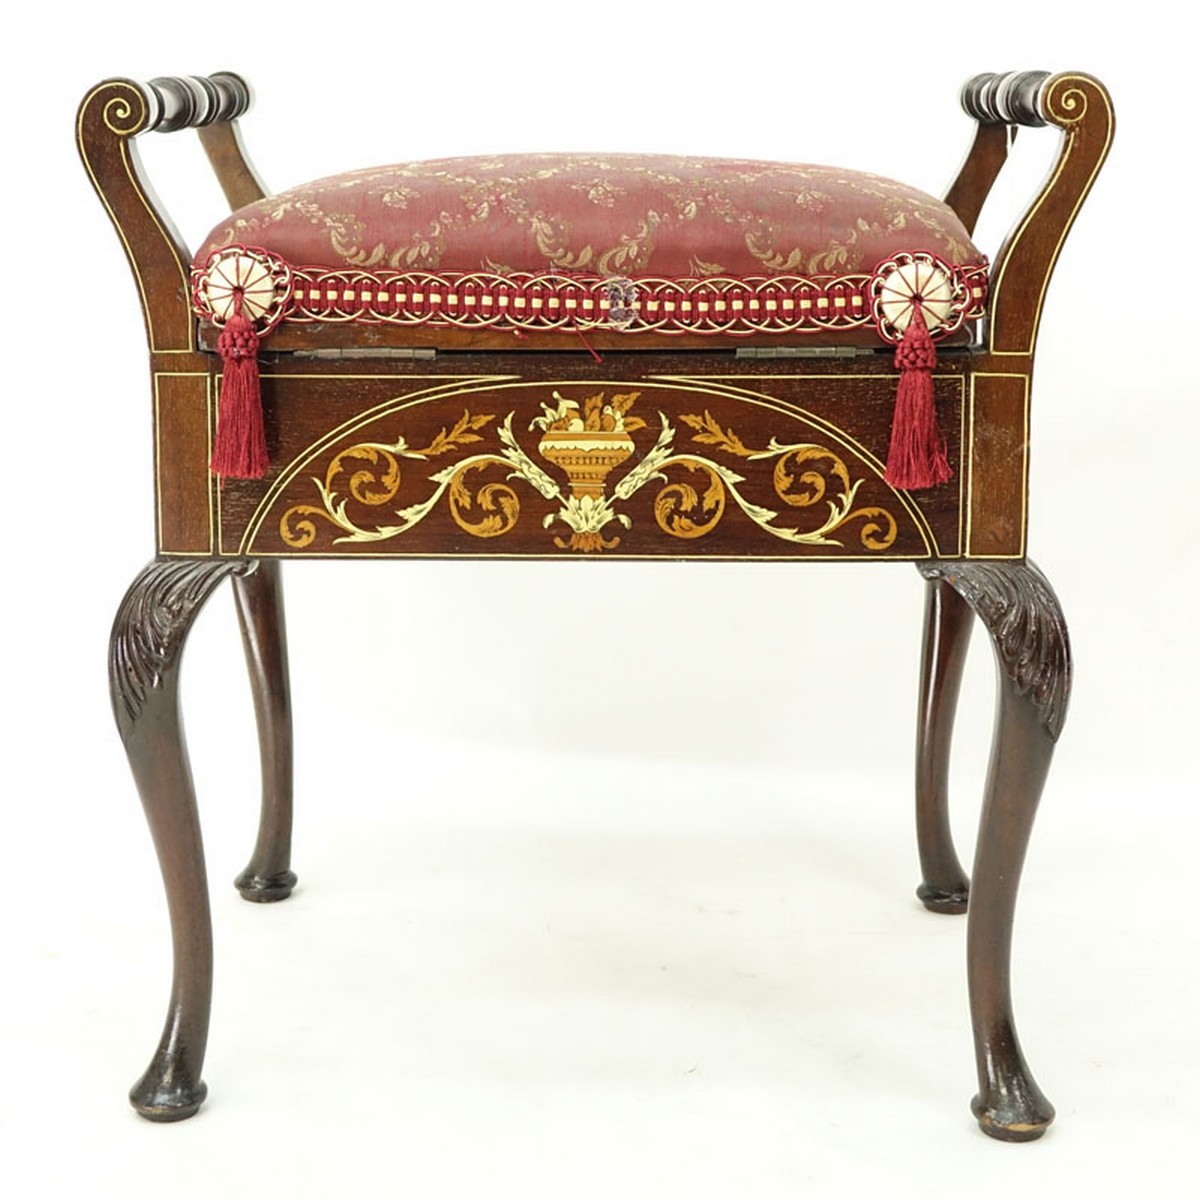 Antique Queen Anne Style Painted and Inlaid Upholstered Bench. Rubbing to varnish, split to wood on one side, light scratches to wood.